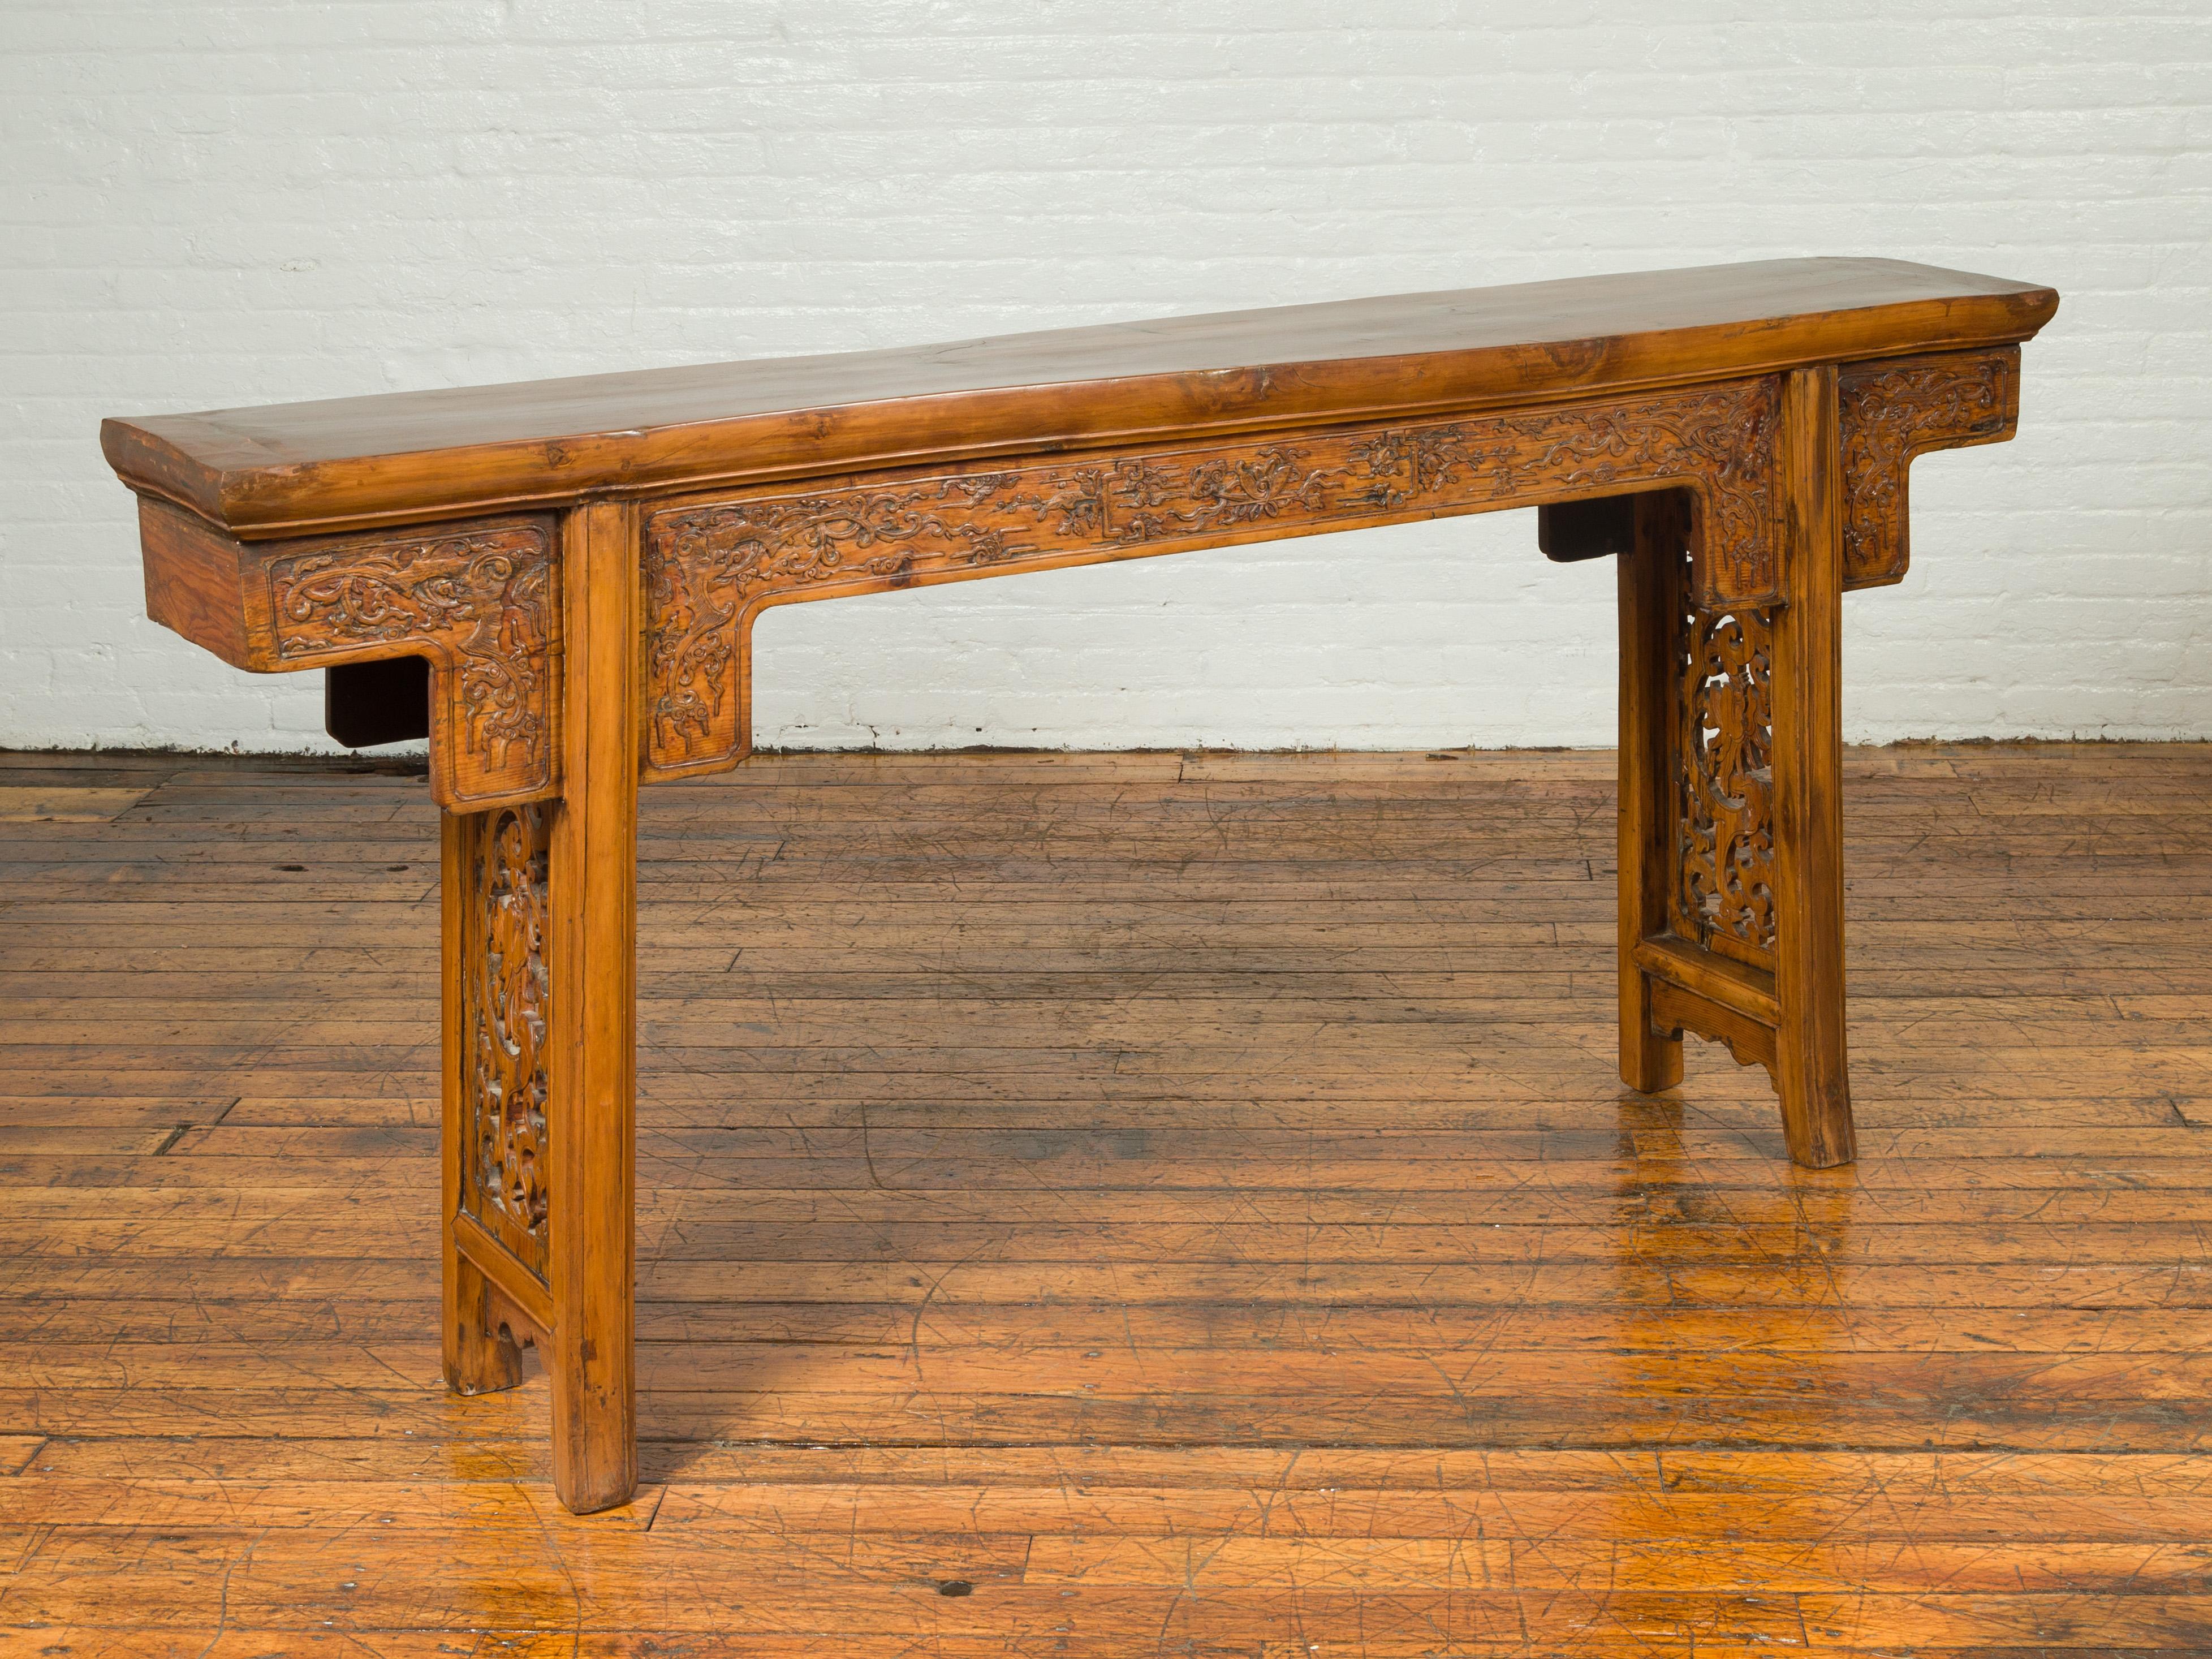 Chinese Ming Style Altar Table with Foliage Carved Frieze and Open Fretwork For Sale 4